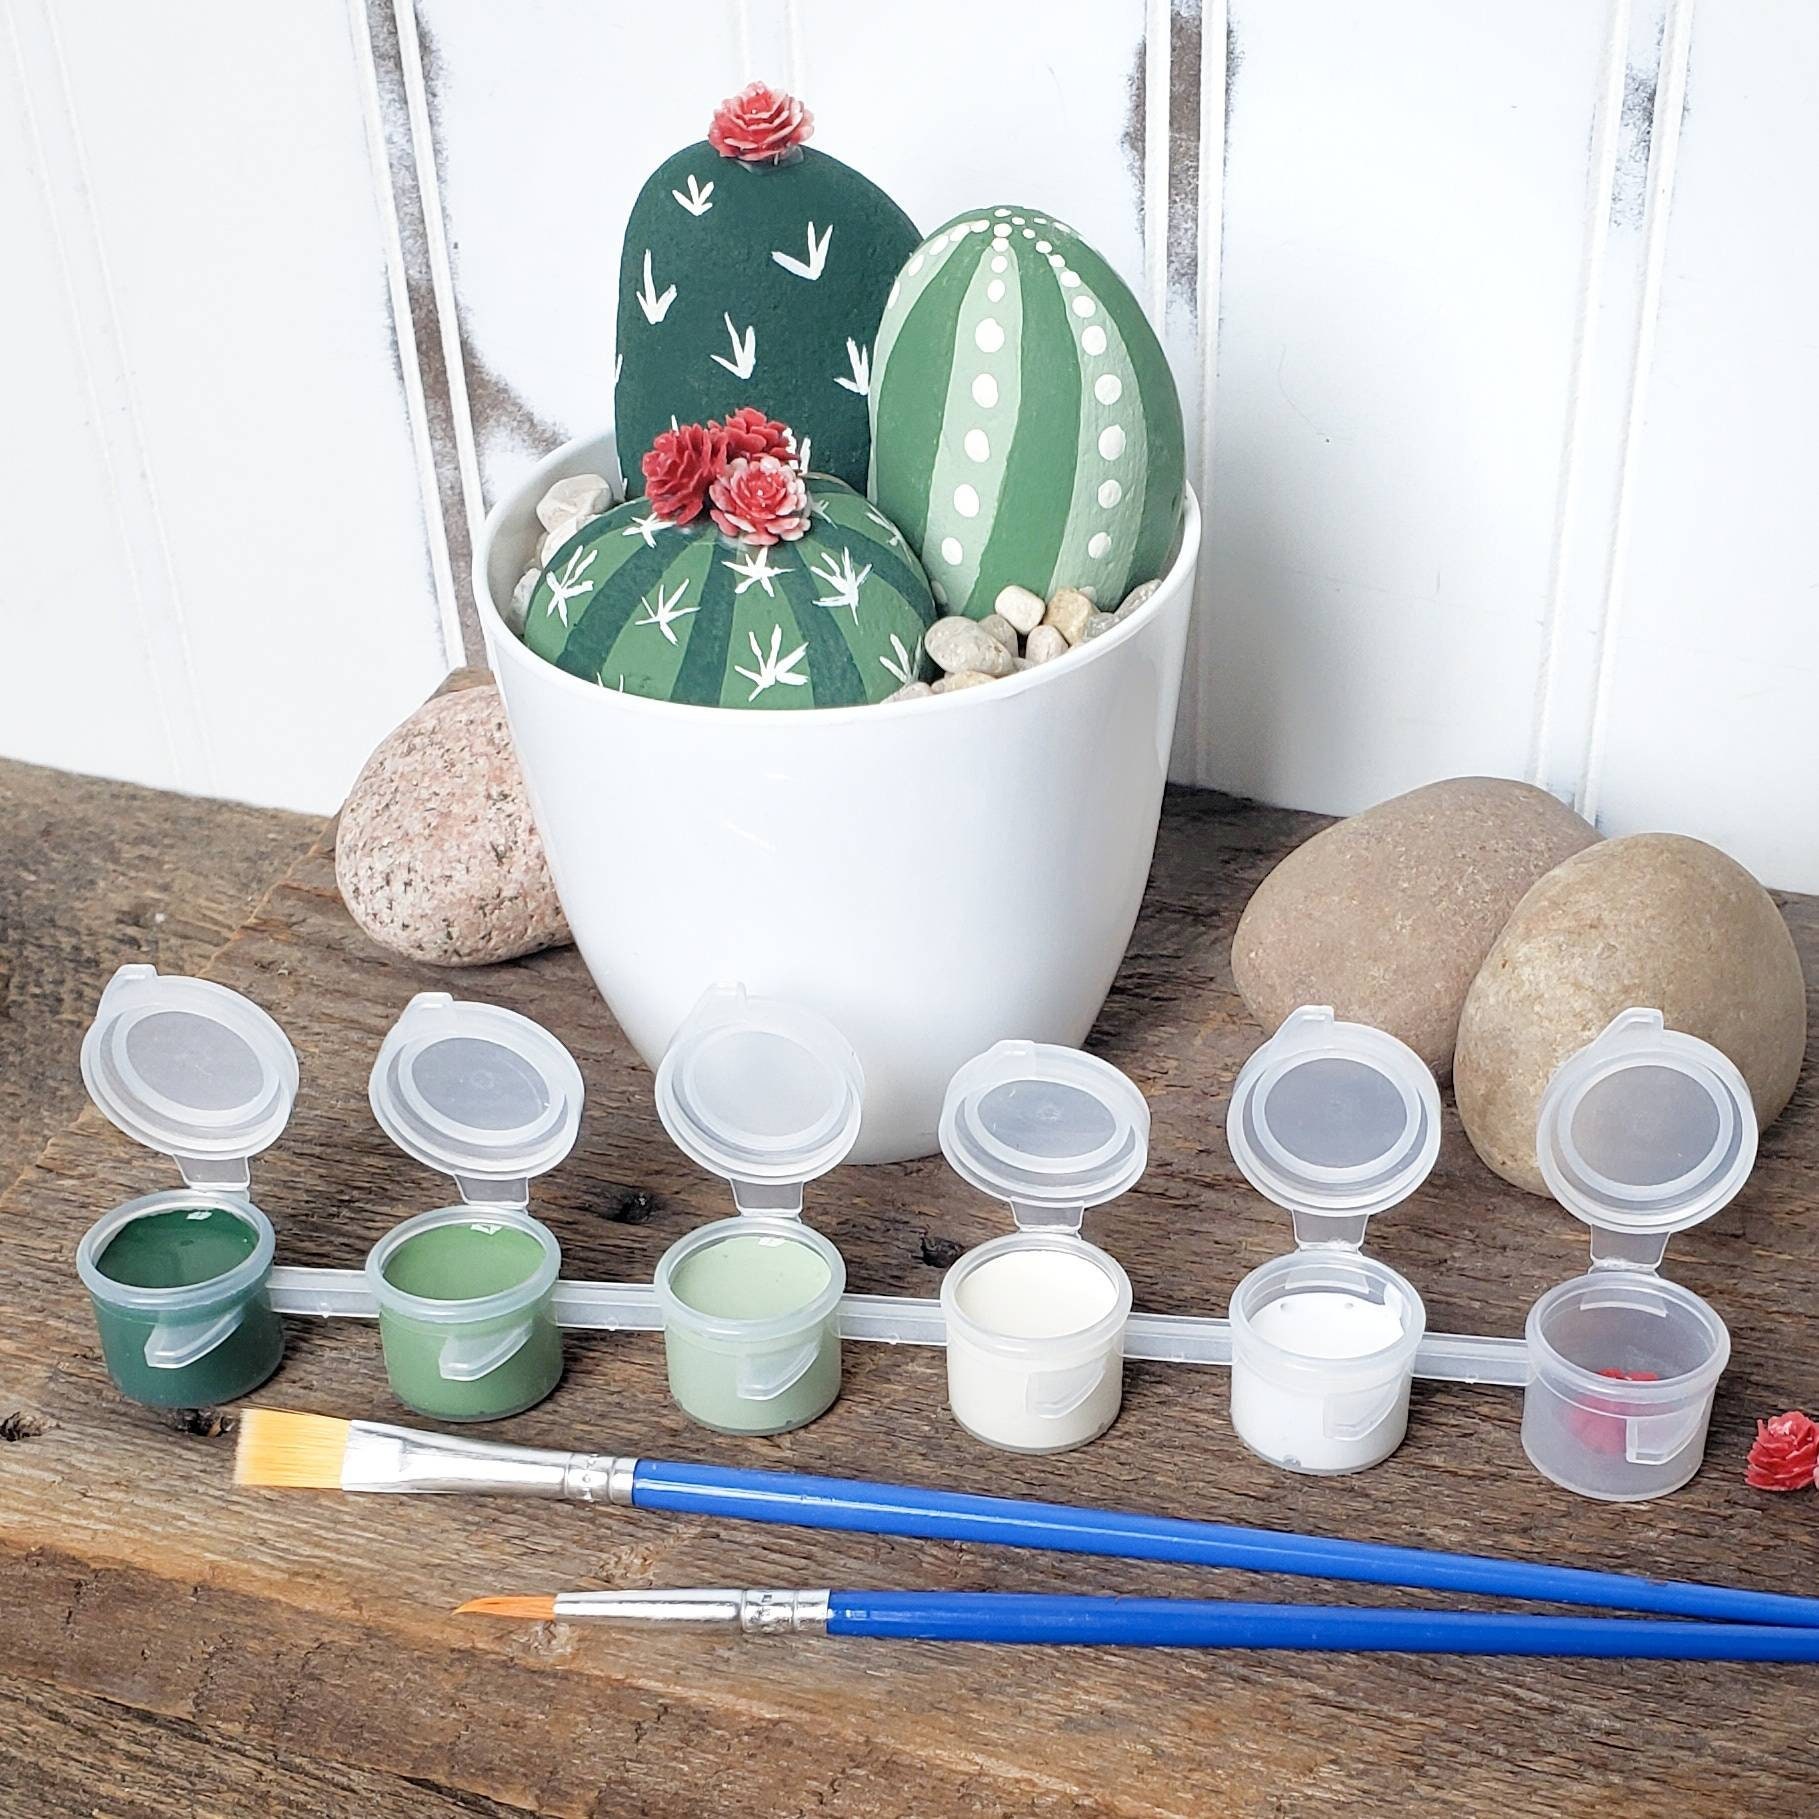 Love Rocks Cactus Kit, Rock Painting, DIY Craft, Craft Kit for Kids -  Create Art, Party IN A BOX